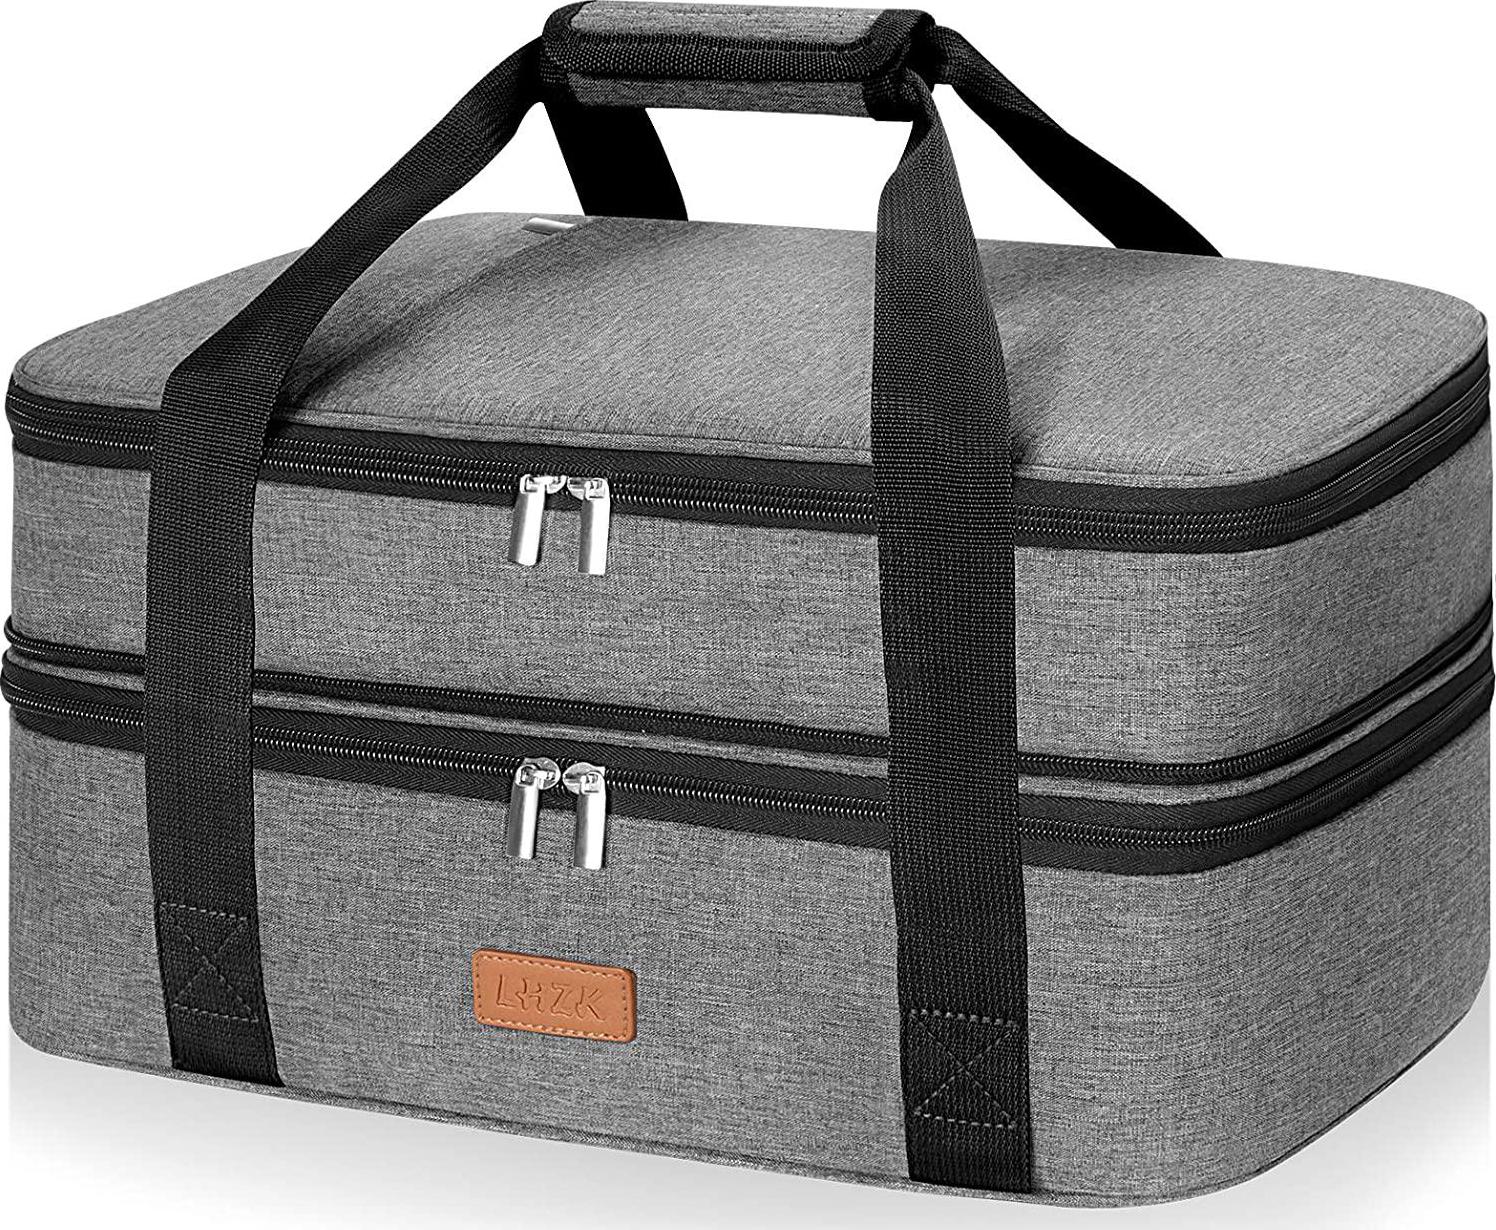 QTW, LHZK Double Decker Insulated Casserole Carrier for Hot or Cold Food, Expandable Hot Food Carrier, Lasagna Holder Tote for Potluck Parties, Picnic, Beach, Fits 9 x13 Baking Dish, Grey